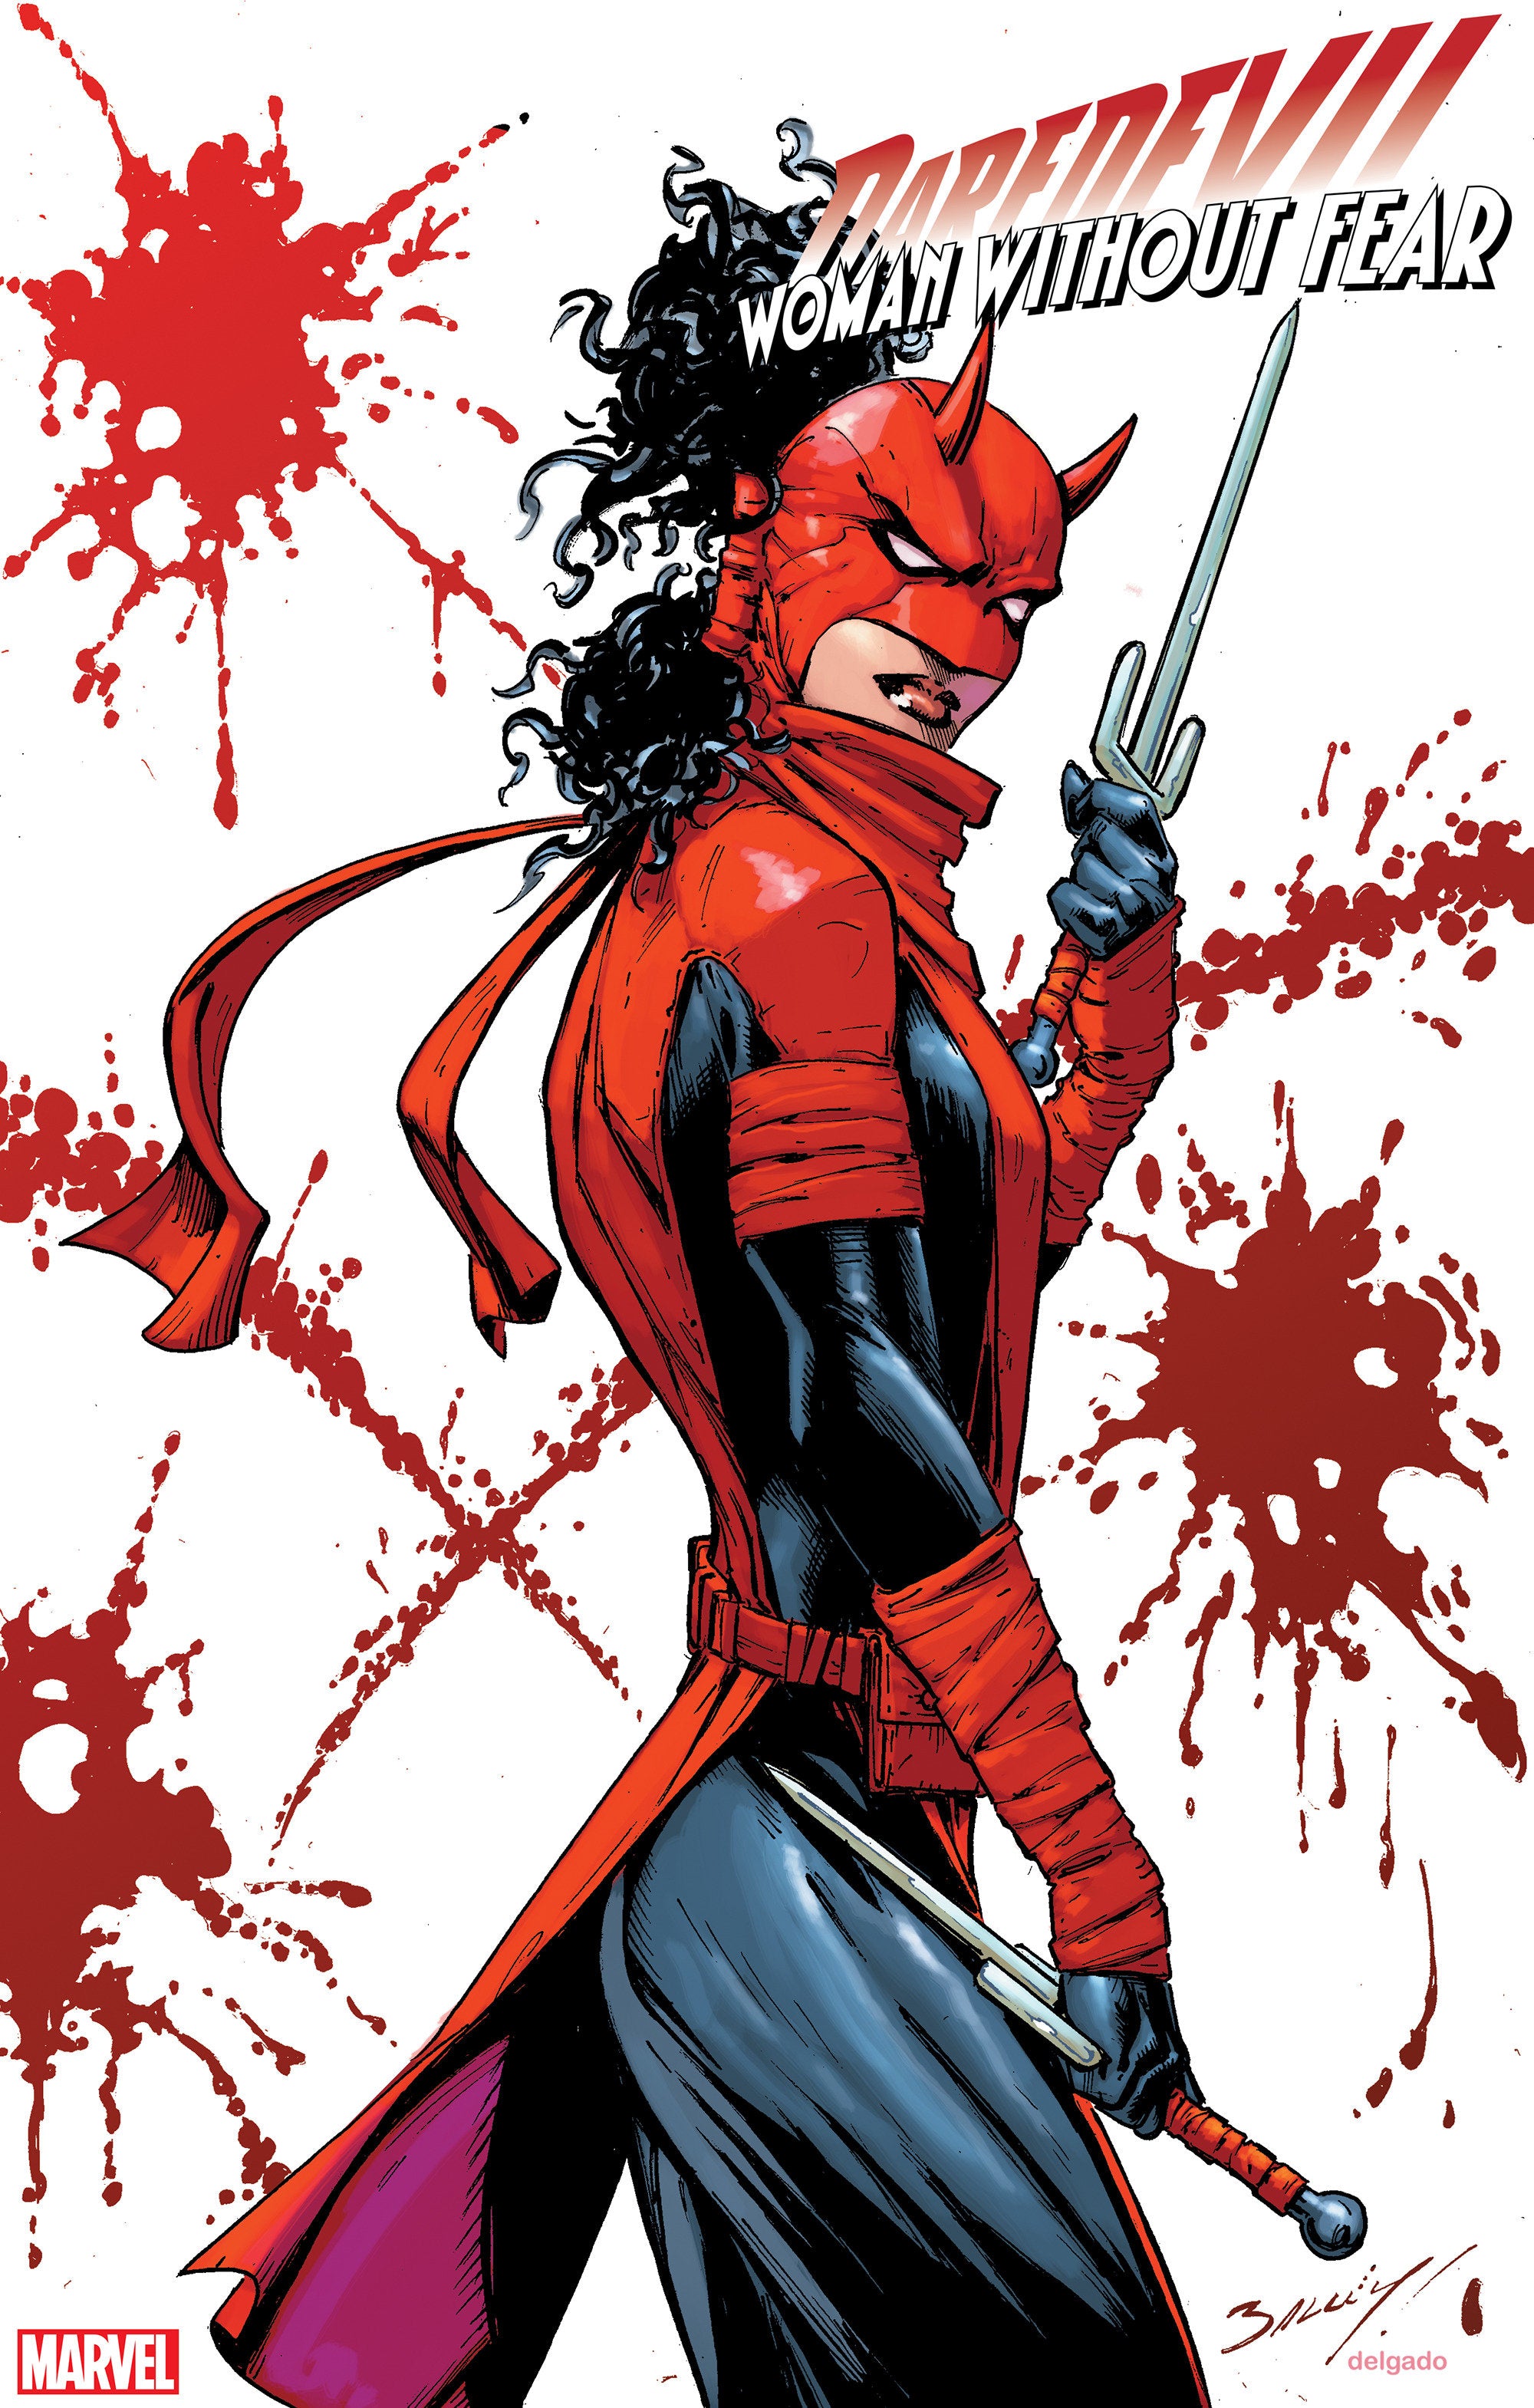 Image of Daredevil Woman Without Fear 2 Bagley Variant comic sold by Stronghold Collectibles.